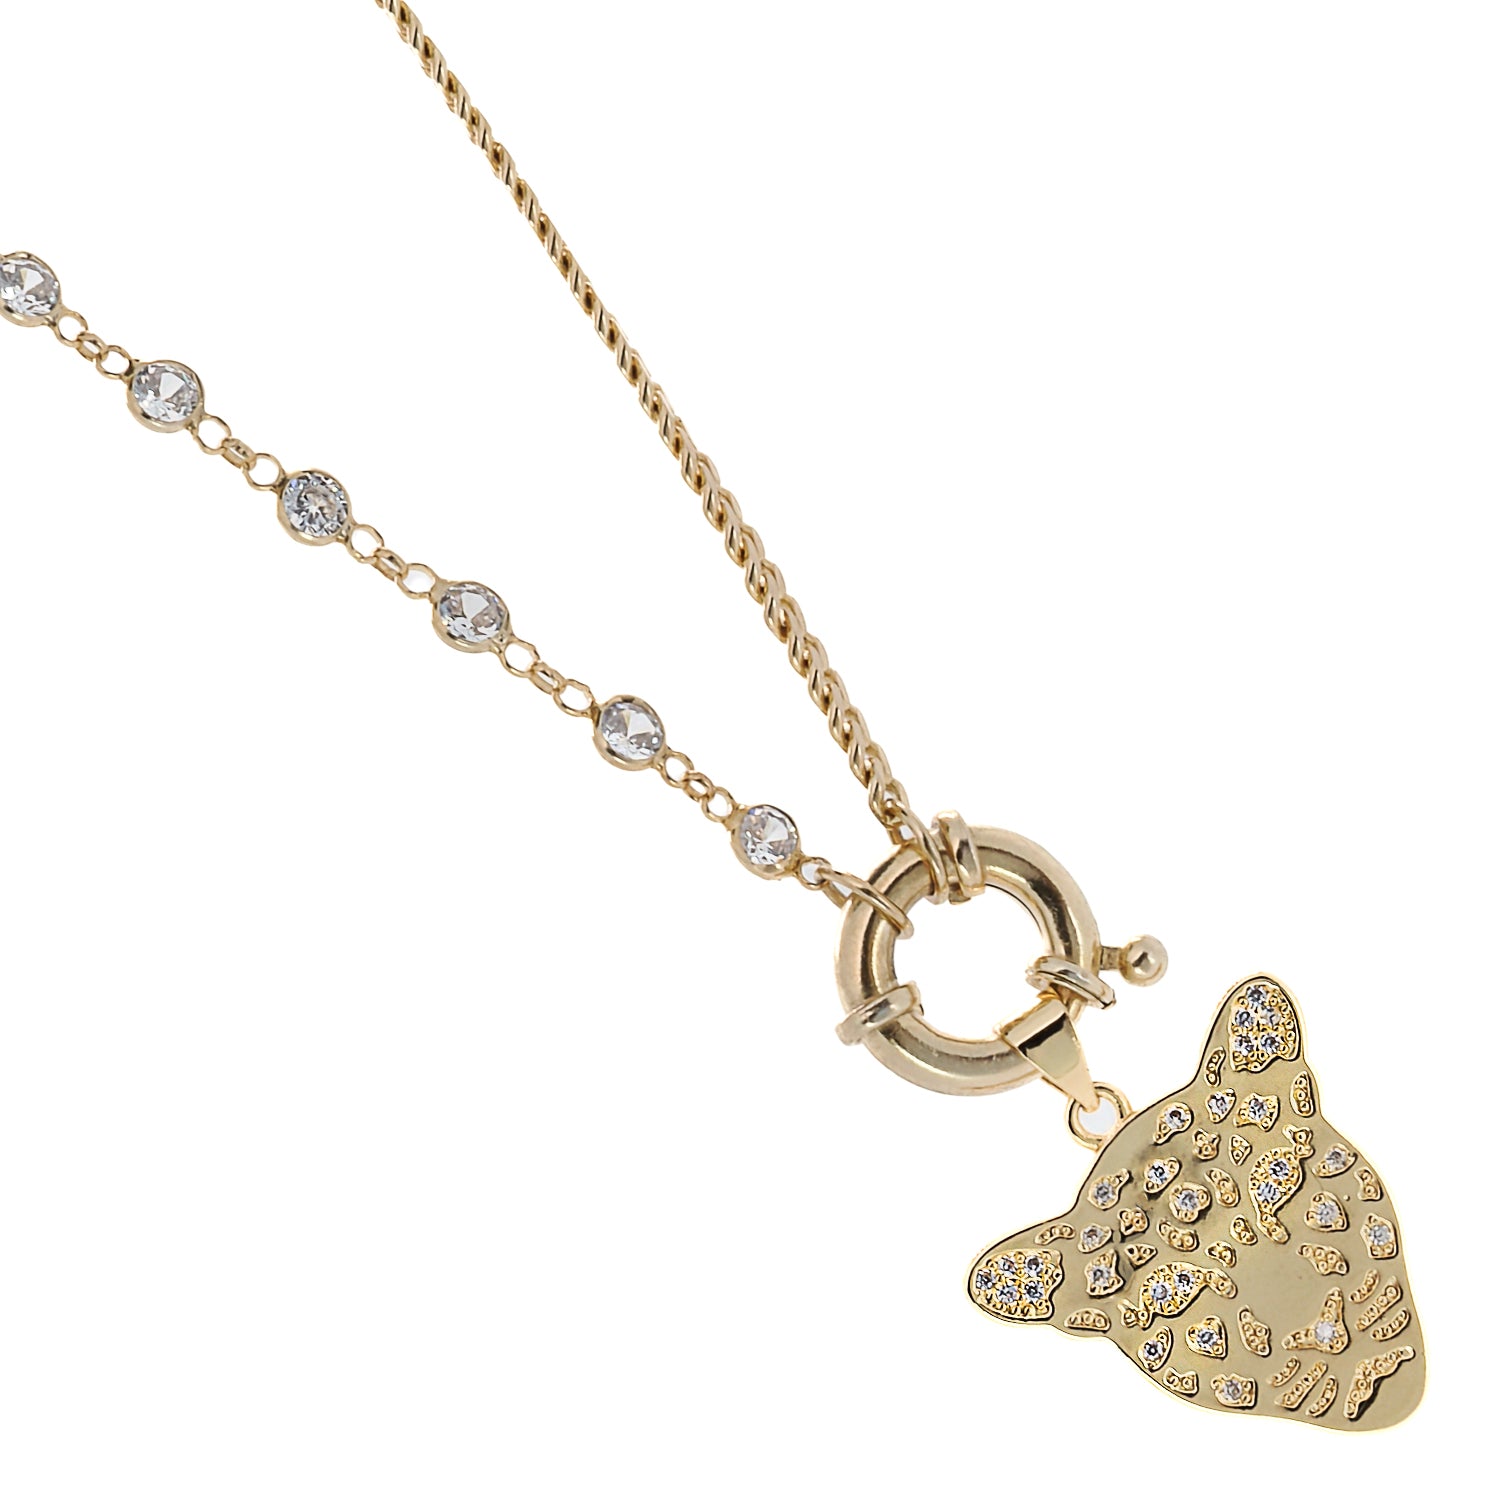 A close-up of the Panther Gold Chain Necklace, showcasing the intricate details of the gold plated panther pendant and the sparkling zircon stones.